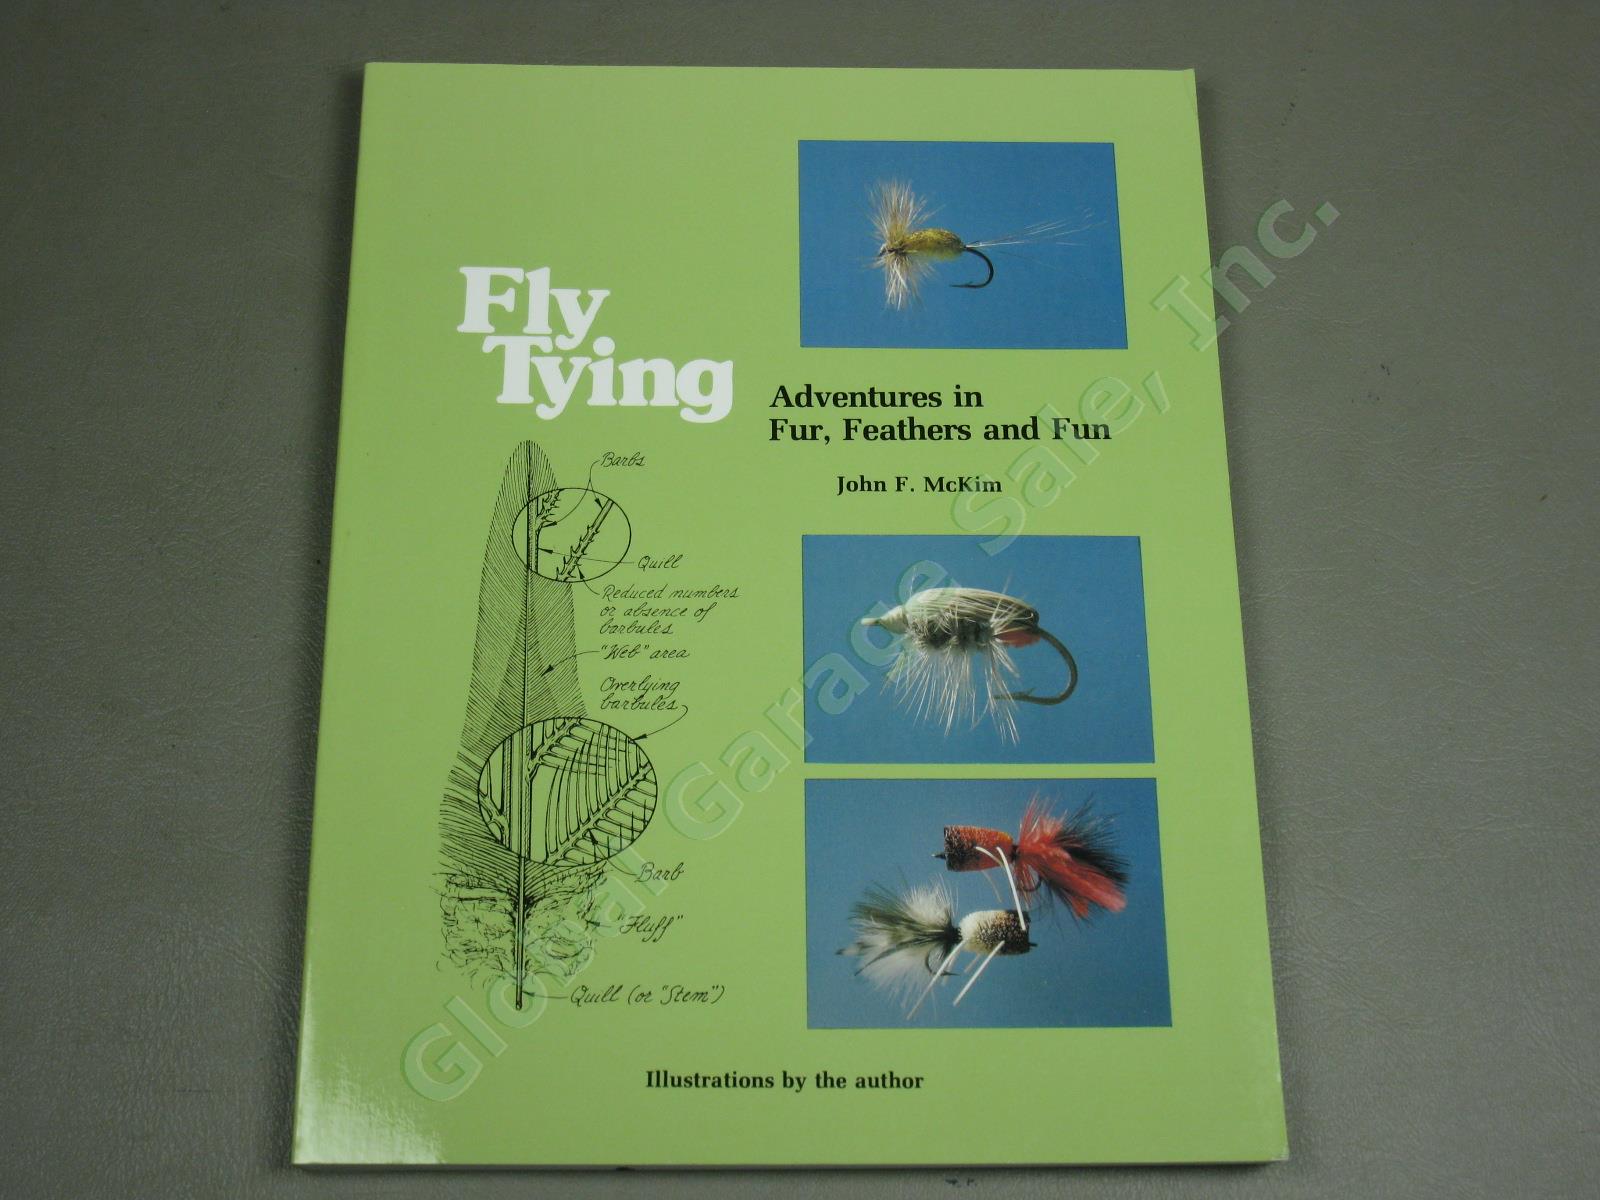 19 Fly Tying Manuals Fishing Books Lot Trout Flies Nymphs Tricos Emergers HC+ NR 12